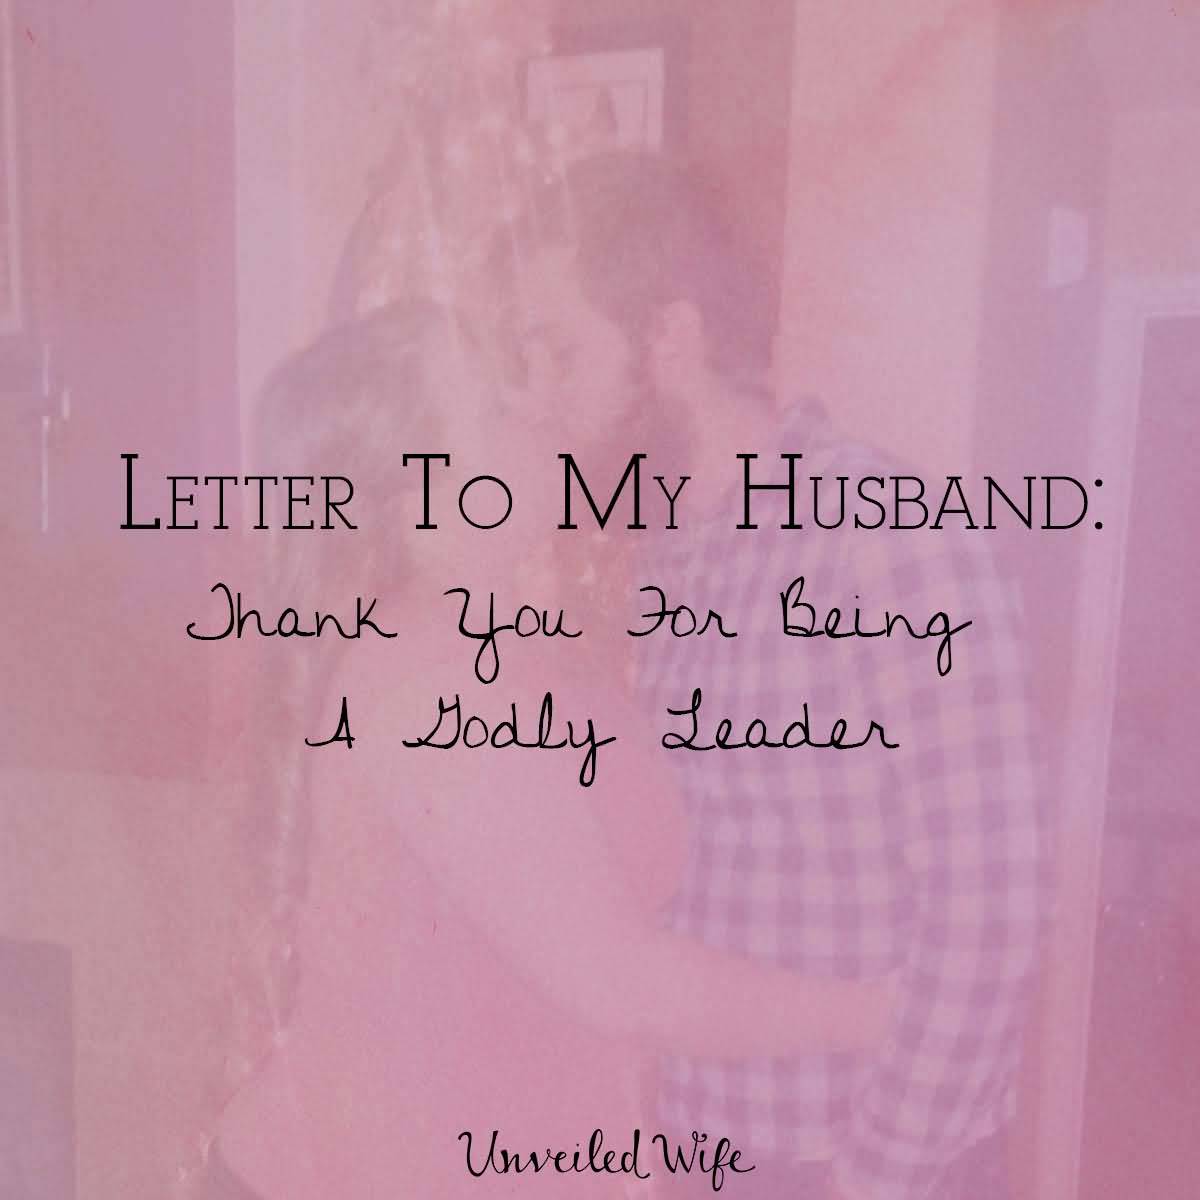 25 Godly Husband Quotes Sayings Images & Photos